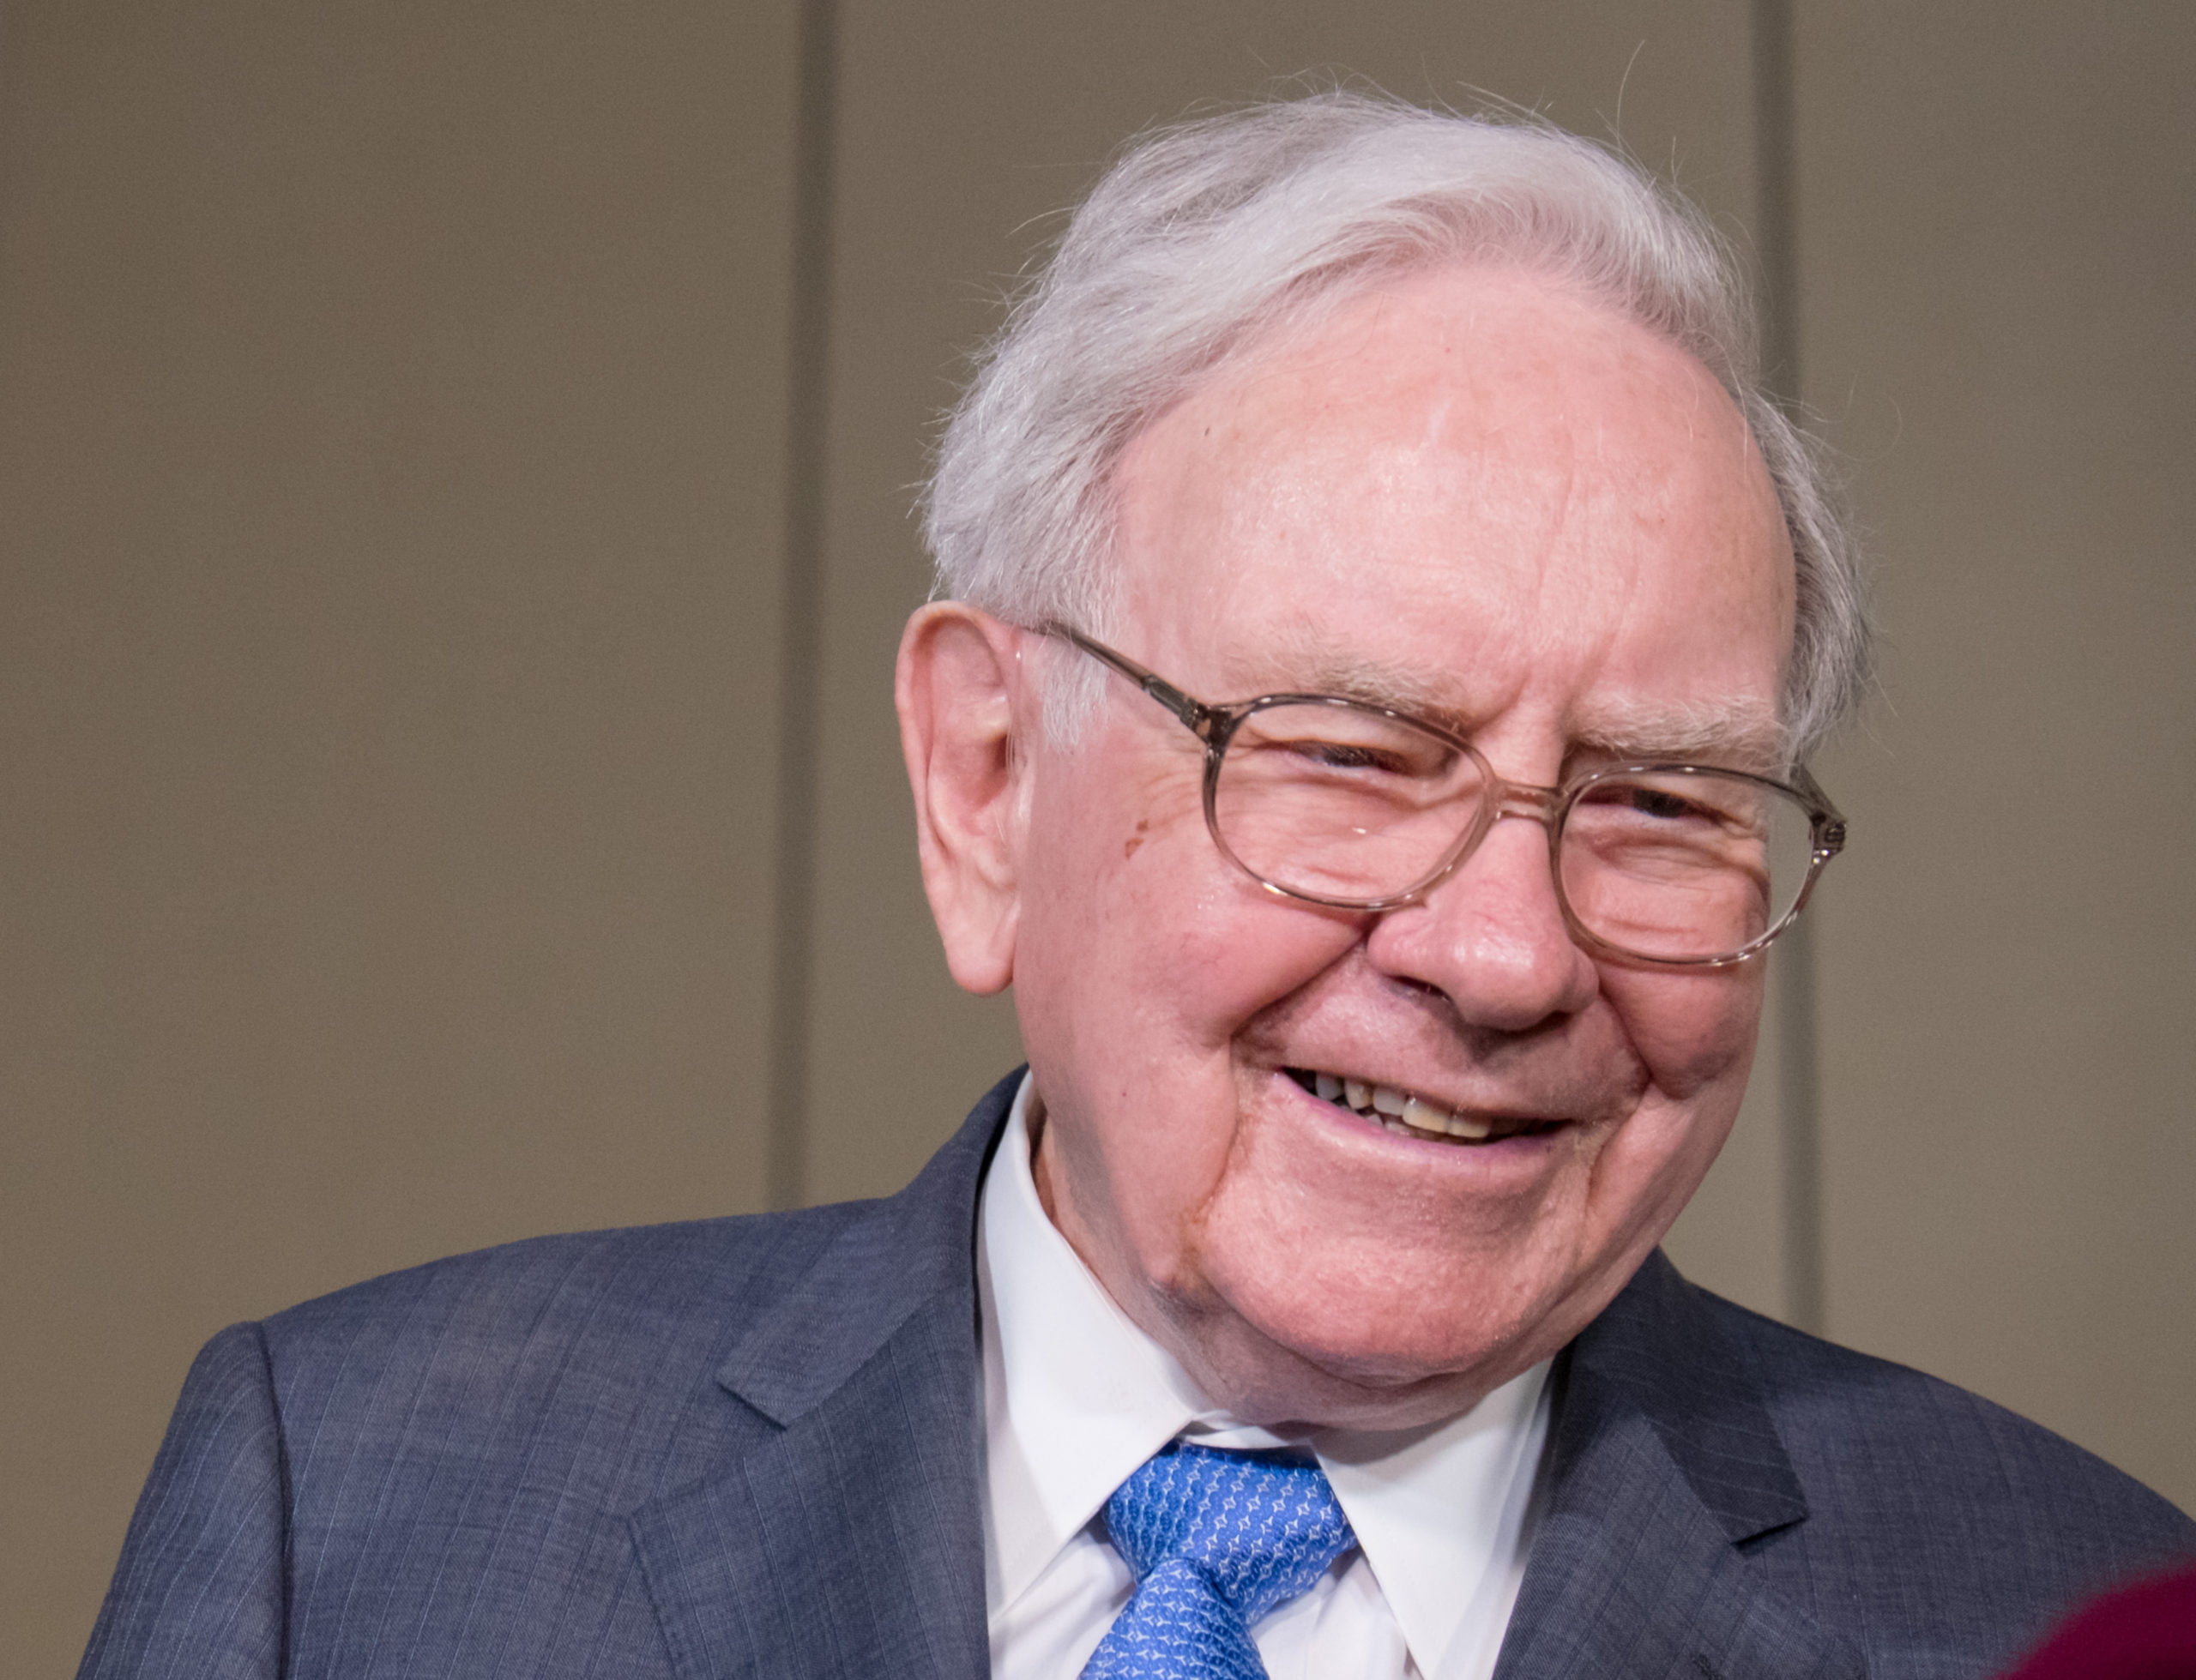 Bitcoin is a poor investment according to Warren Buffett